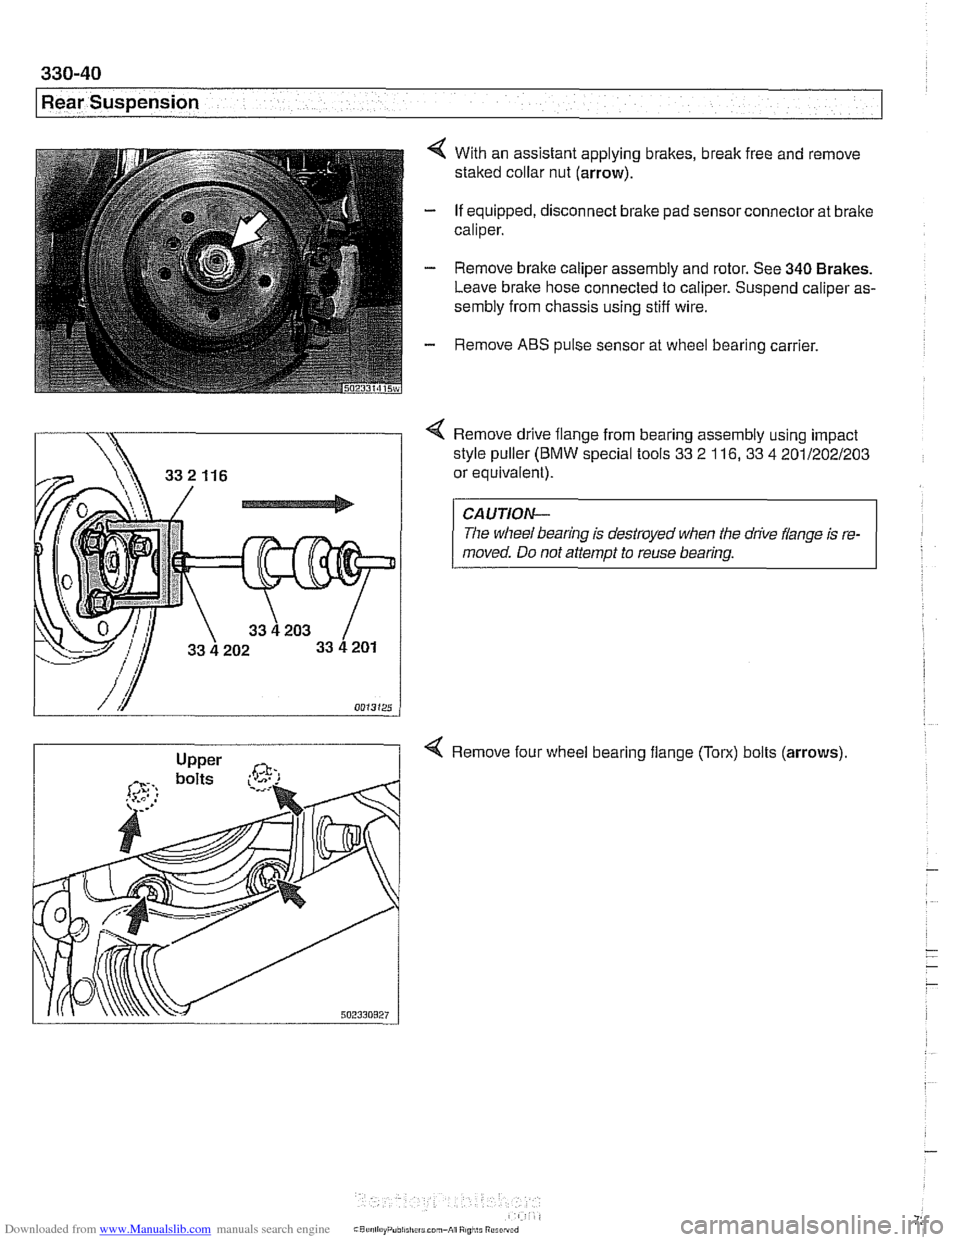 BMW 528i 1998 E39 Workshop Manual Downloaded from www.Manualslib.com manuals search engine 
330-40 
Rear Suspension 
4 With an assistant applying brakes, break free and  remove 
staked  collar nut  (arrow). 
- If equipped,  disconnect